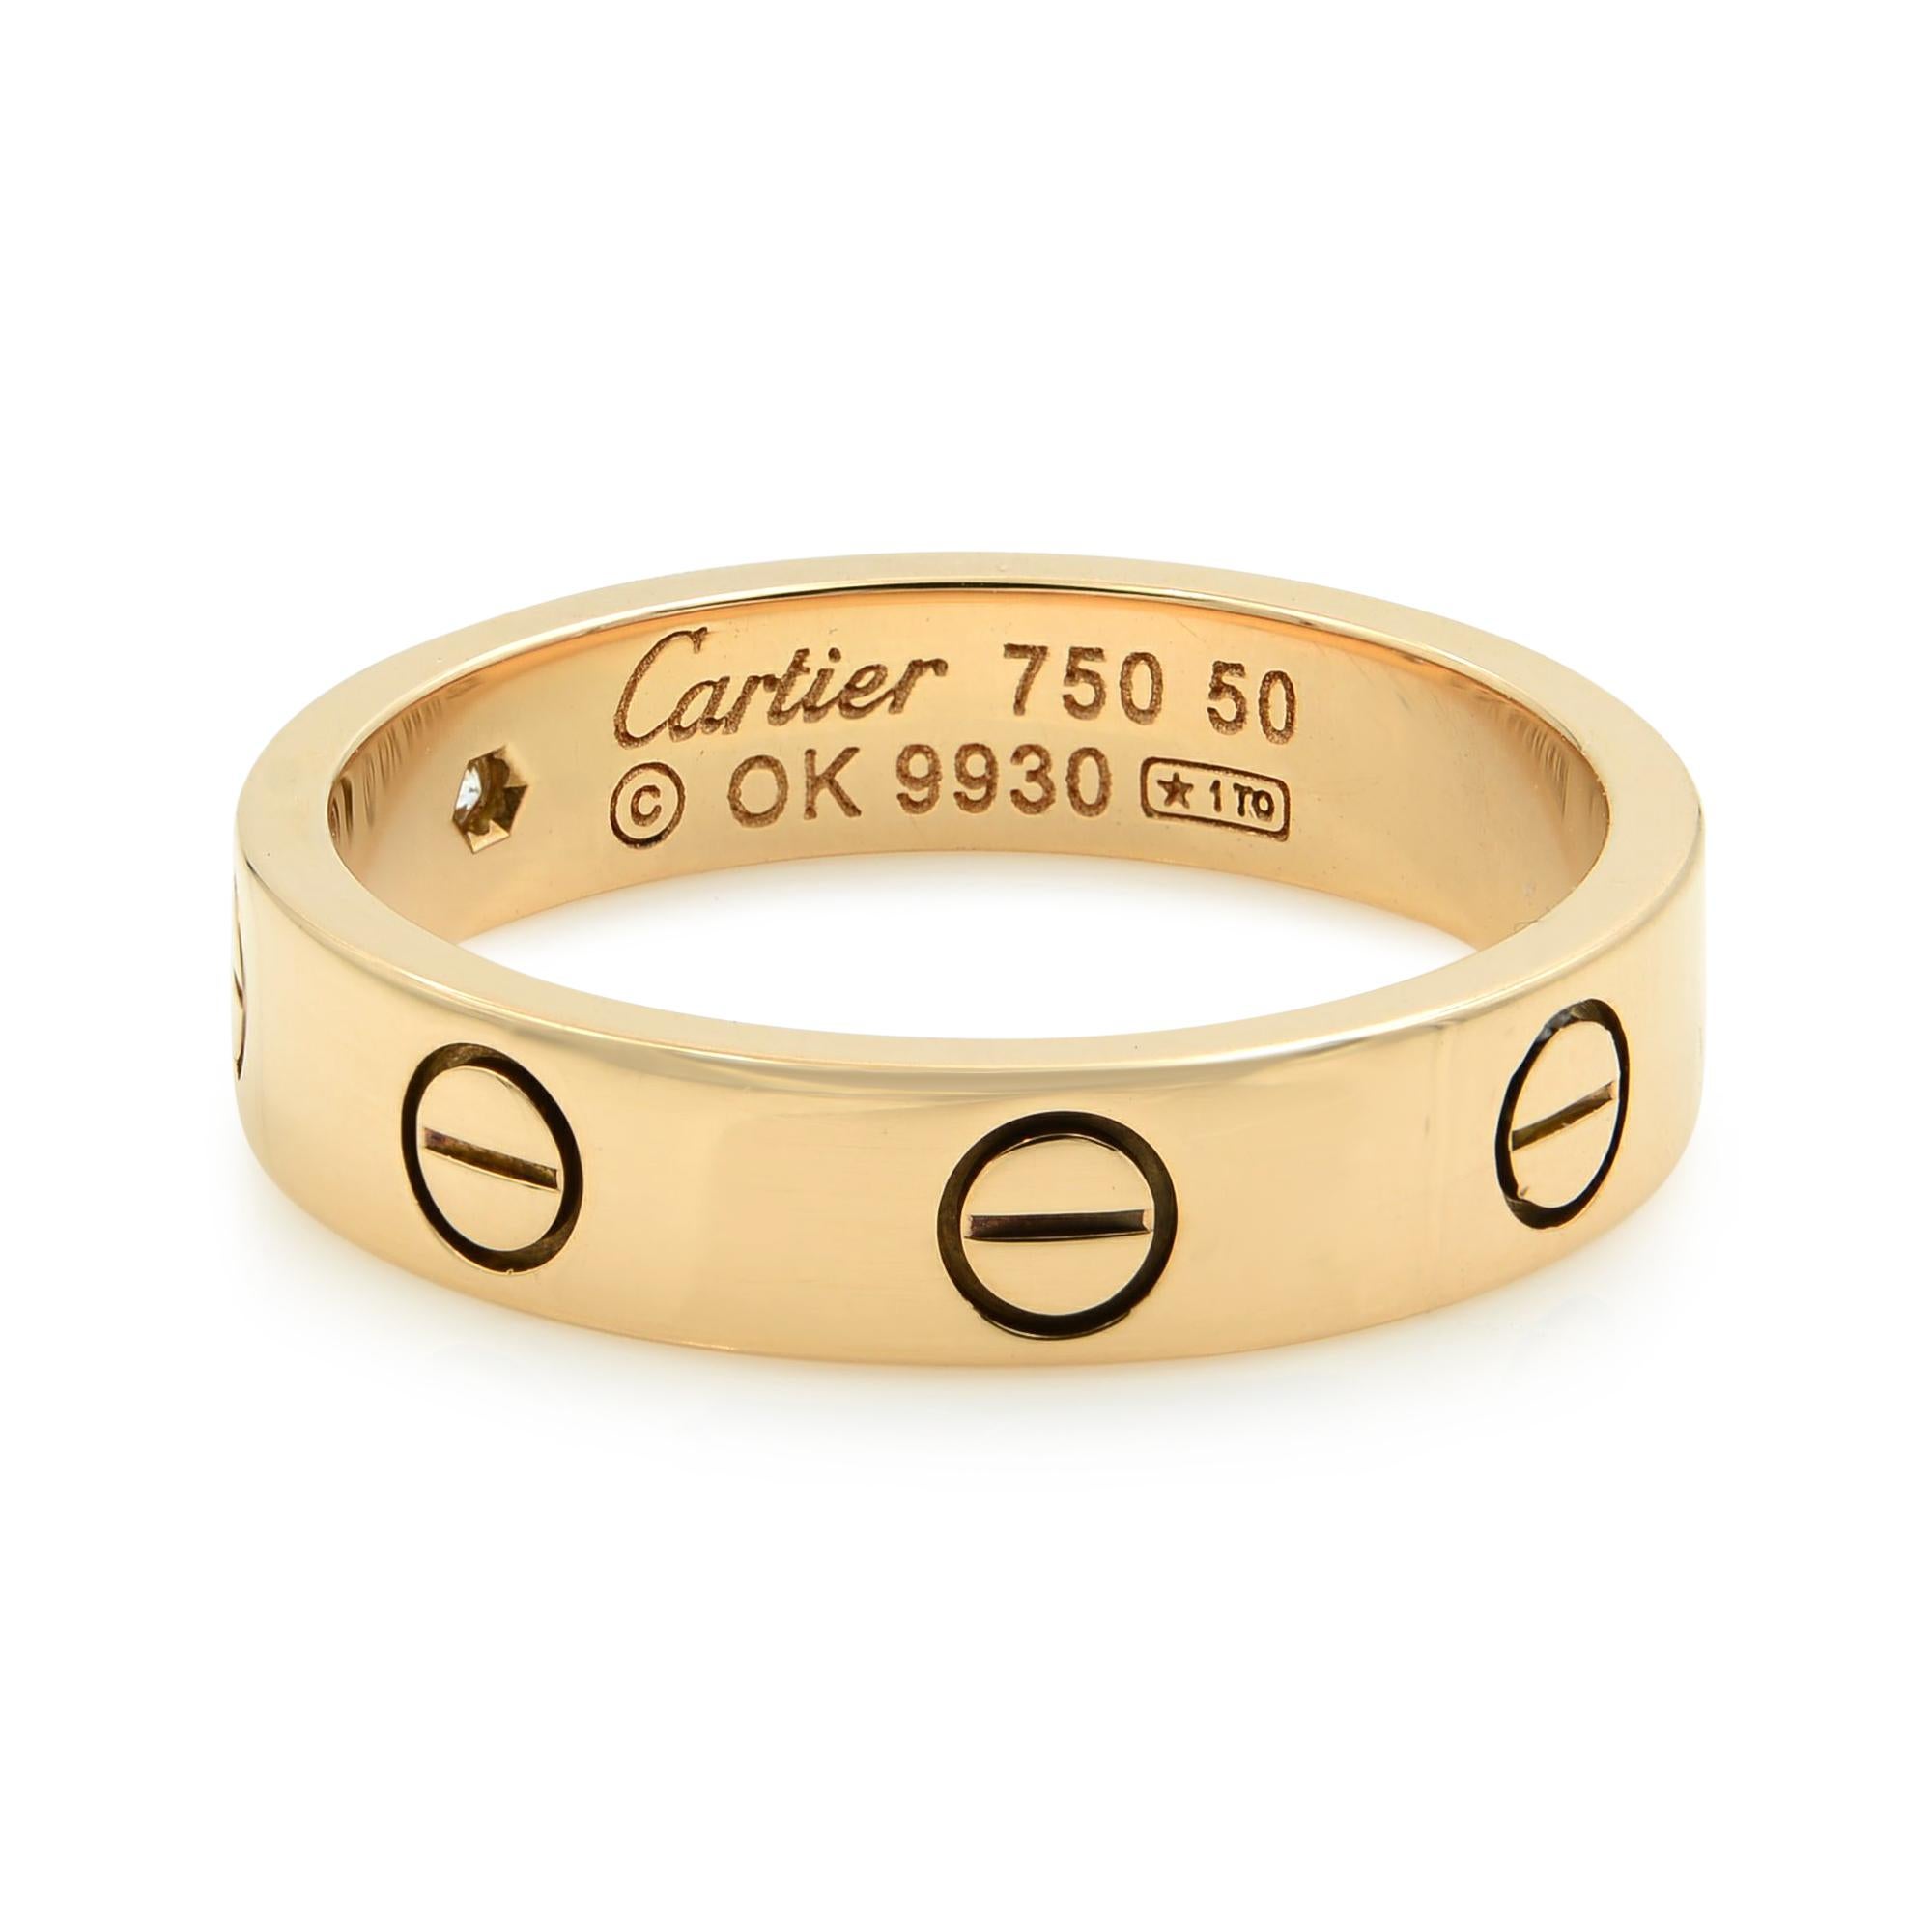 This is an authentic band ring by Cartier, this beautiful authentic designer ring is crafted from 18k rose gold with a fine polished finish and comes from Cartier's famous LOVE collection in the mini style. It is a piece of absolute style and